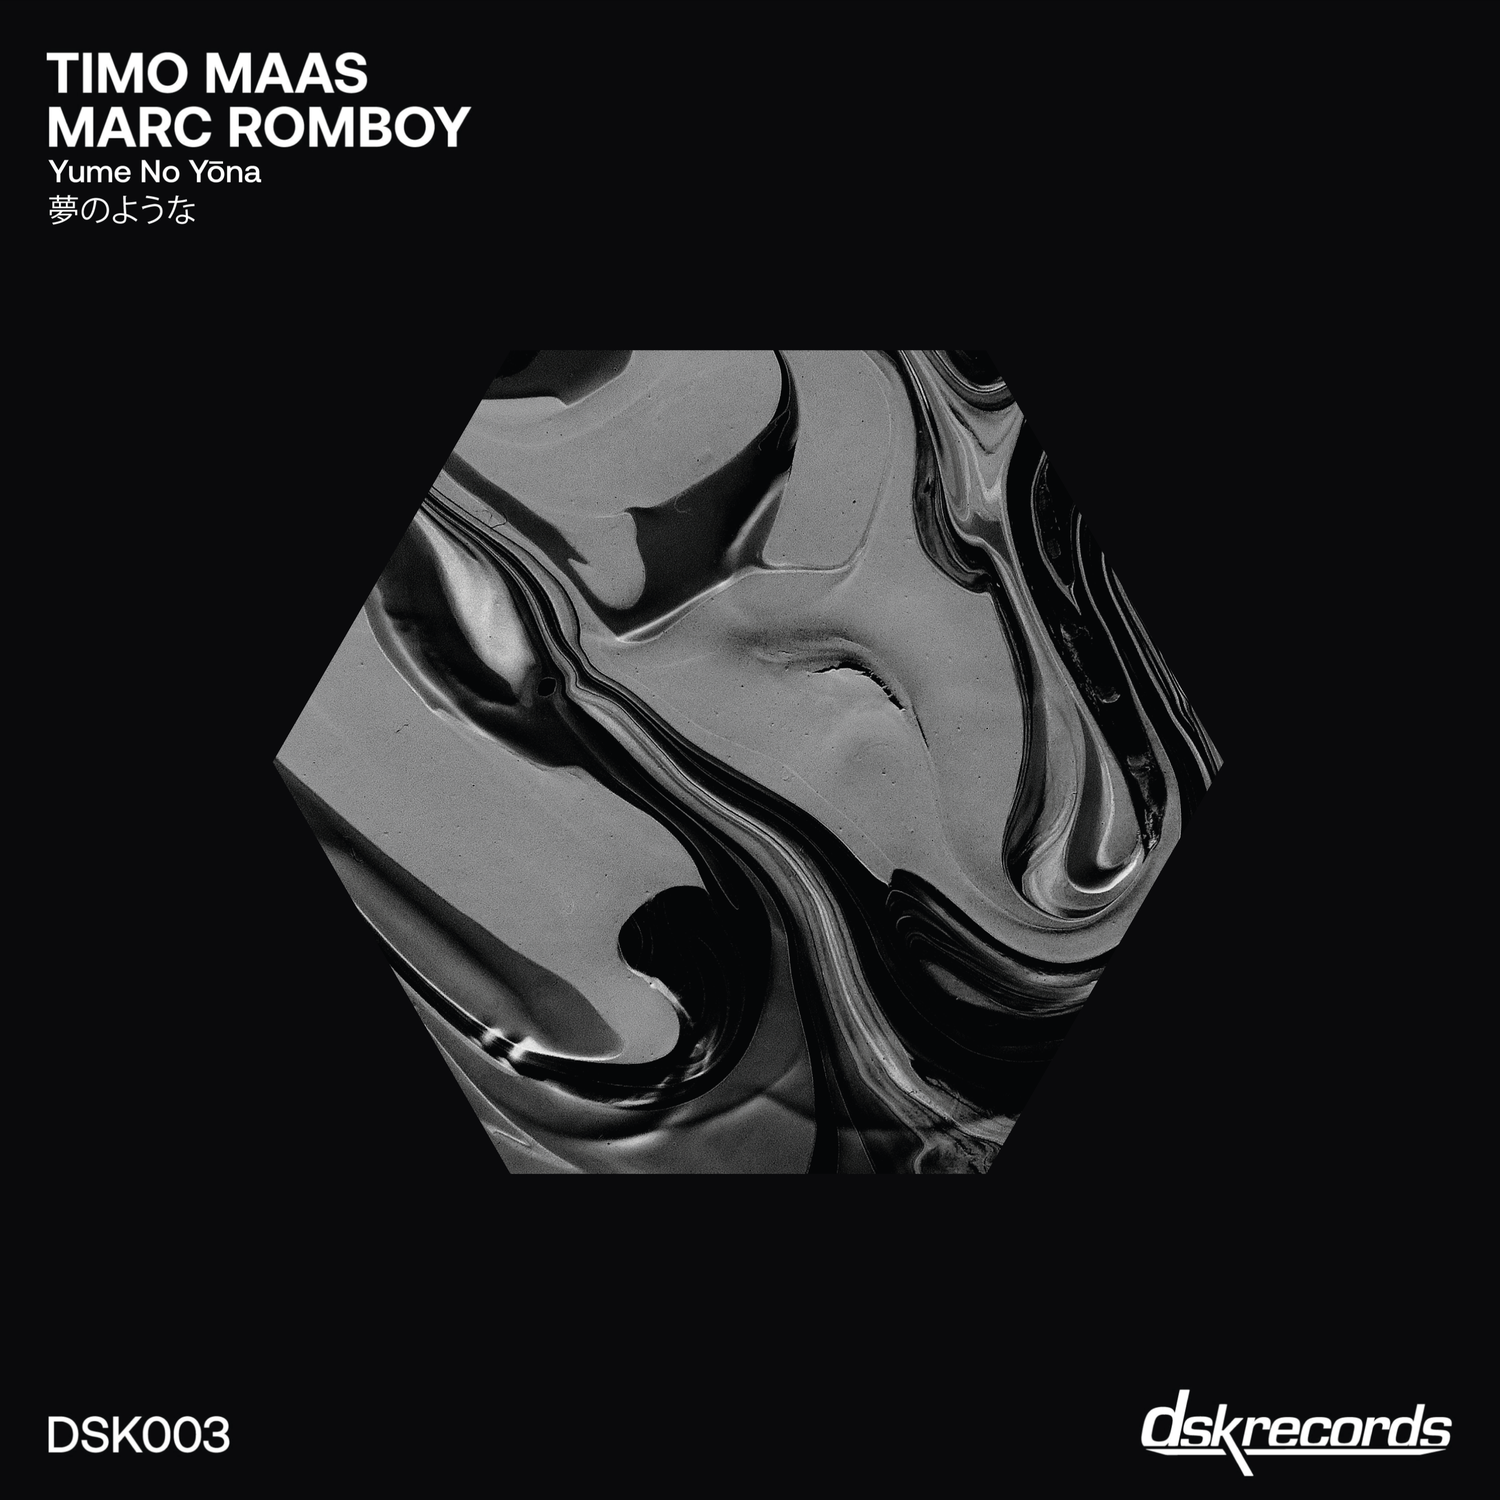 Timo Maas and Marc Romboy